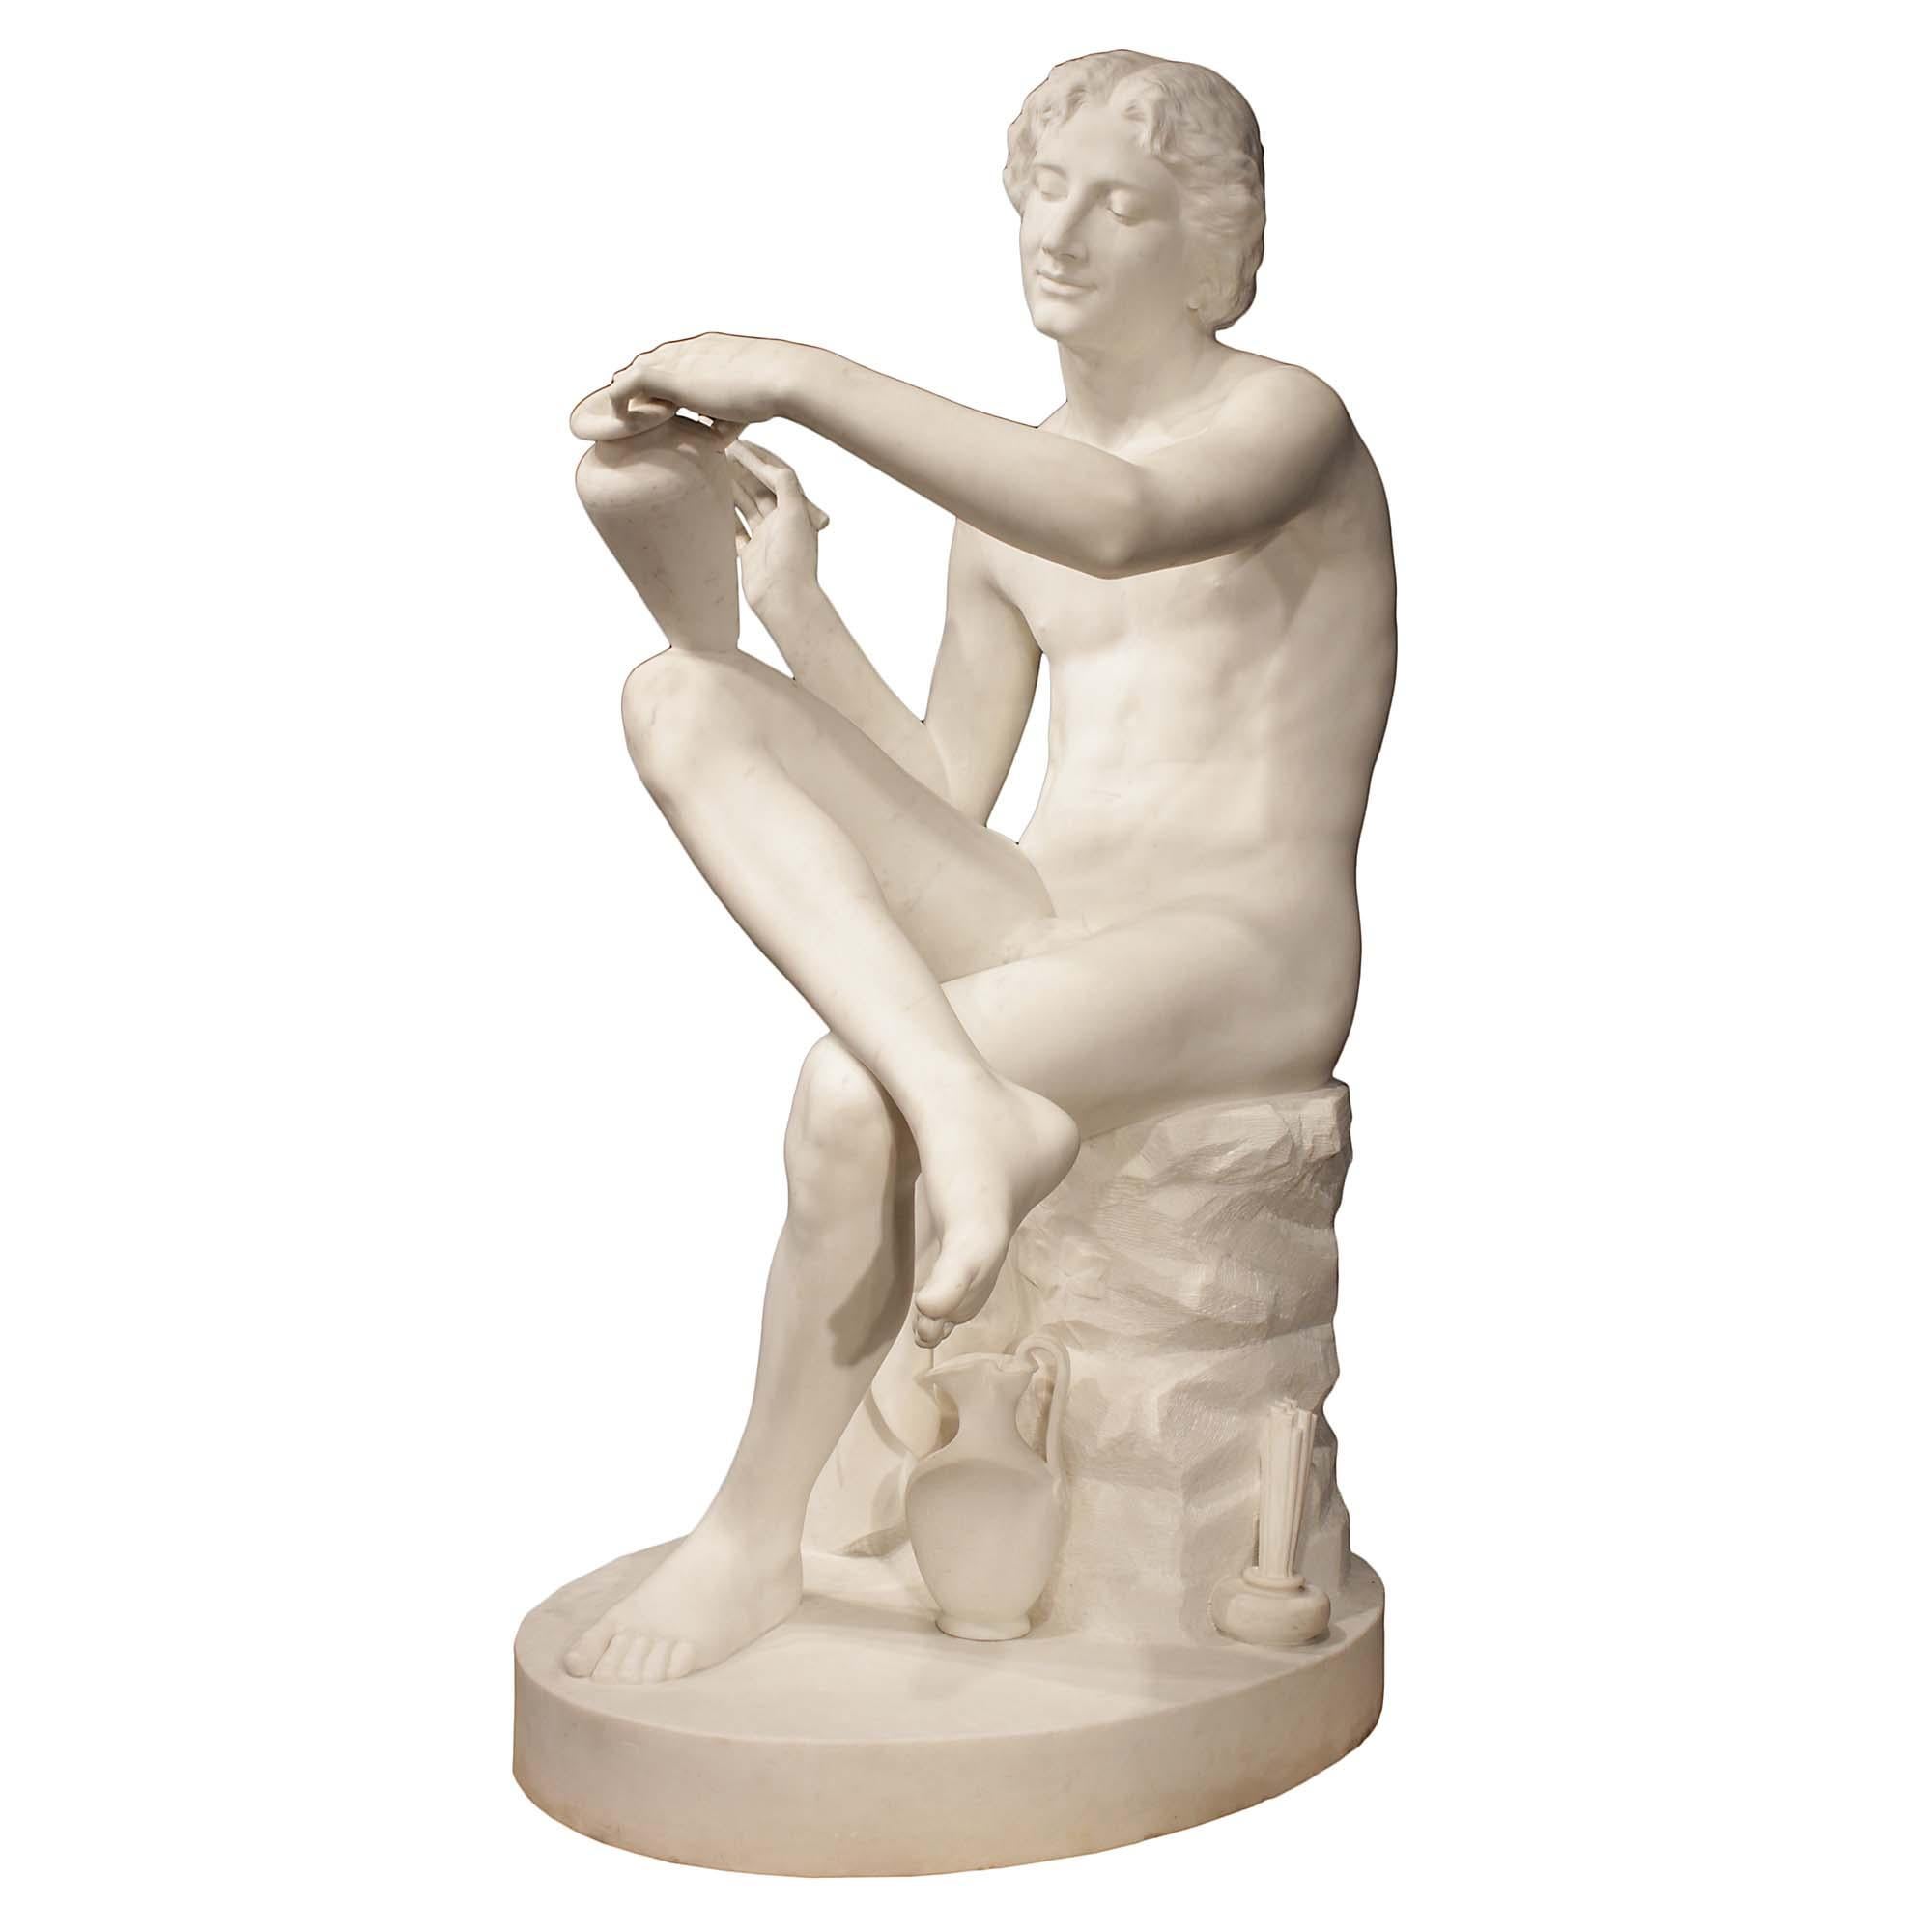 A very impressive Italian 19th century solid white Carrara marble sculpture, signed S. Schroeder 1875. The statue is raised on a circular base depicting a draped artist, seated with his leg crossed, perusing his work. He holds a vase and other urns